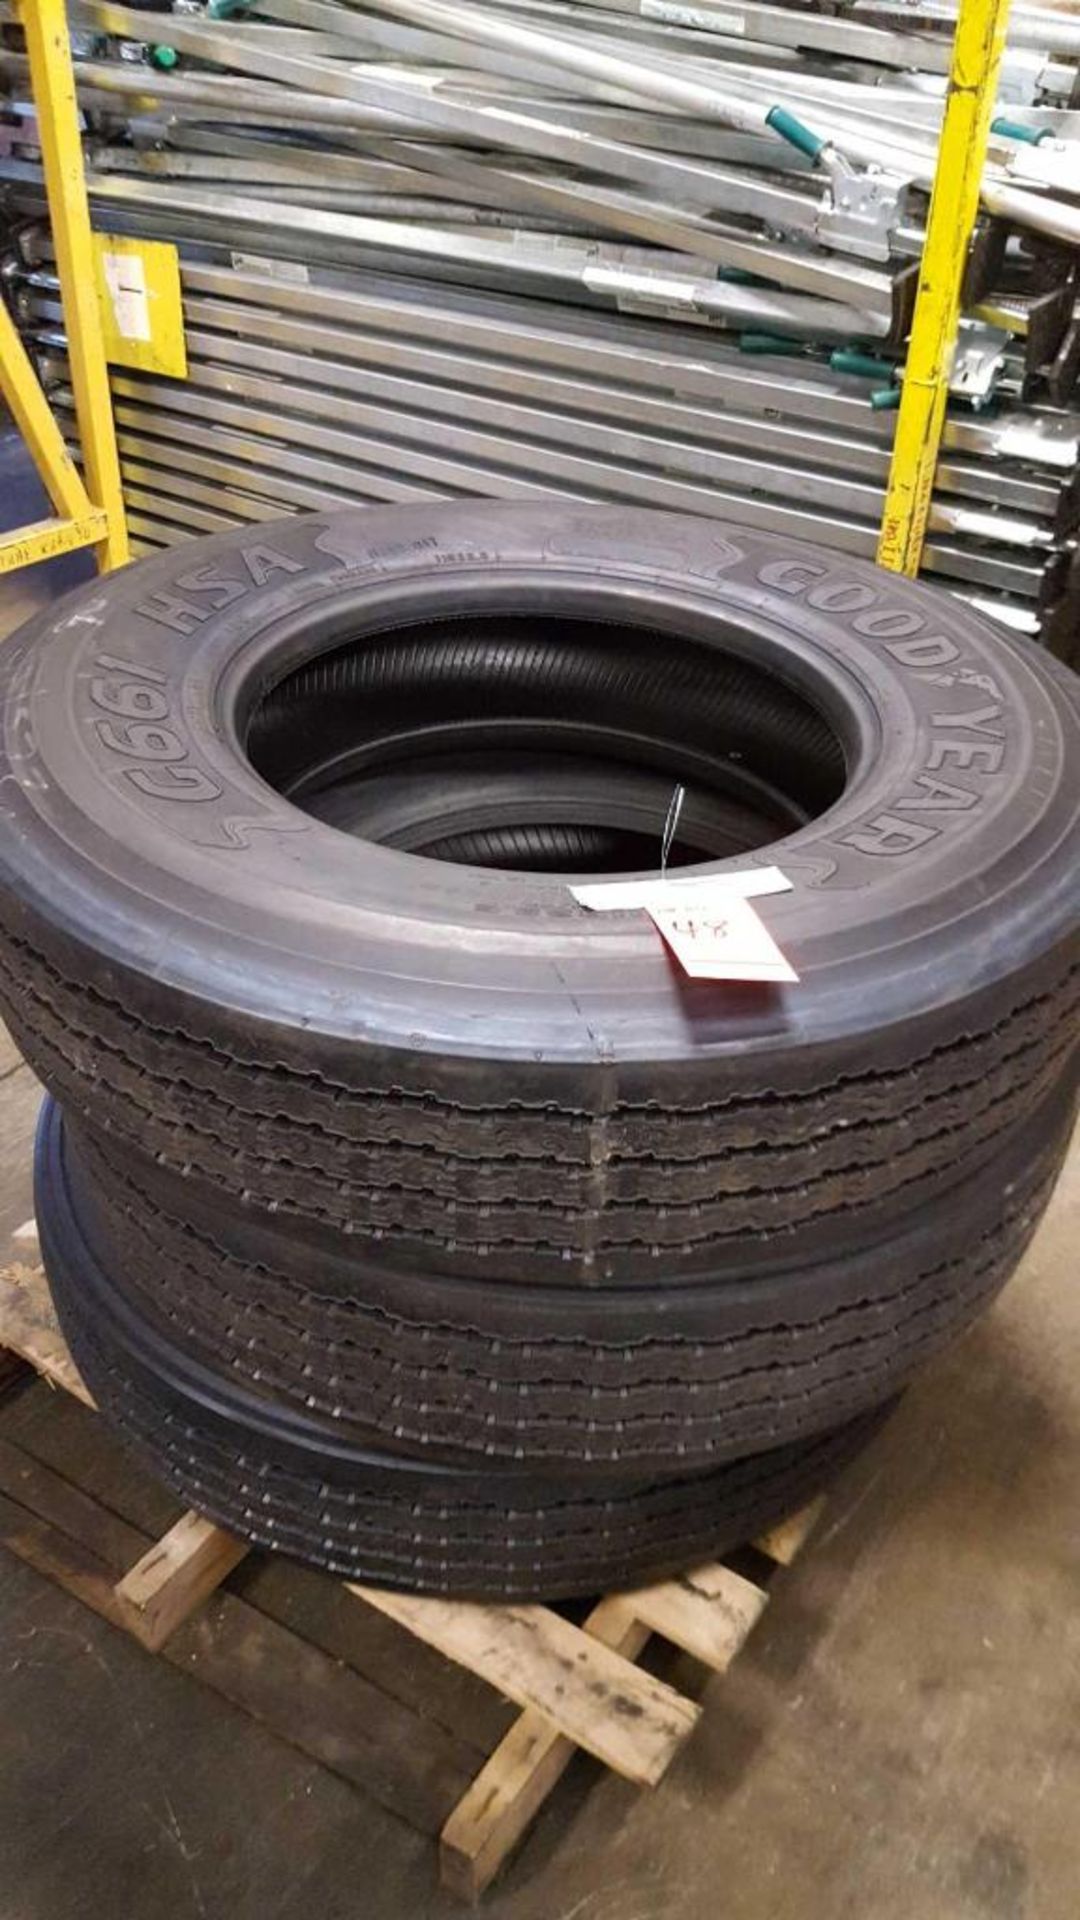 Lot of (3) assorted retreaded tires including (1) Goodyear G61HSA 11R 22.5, (1)Continental HDC 11R22